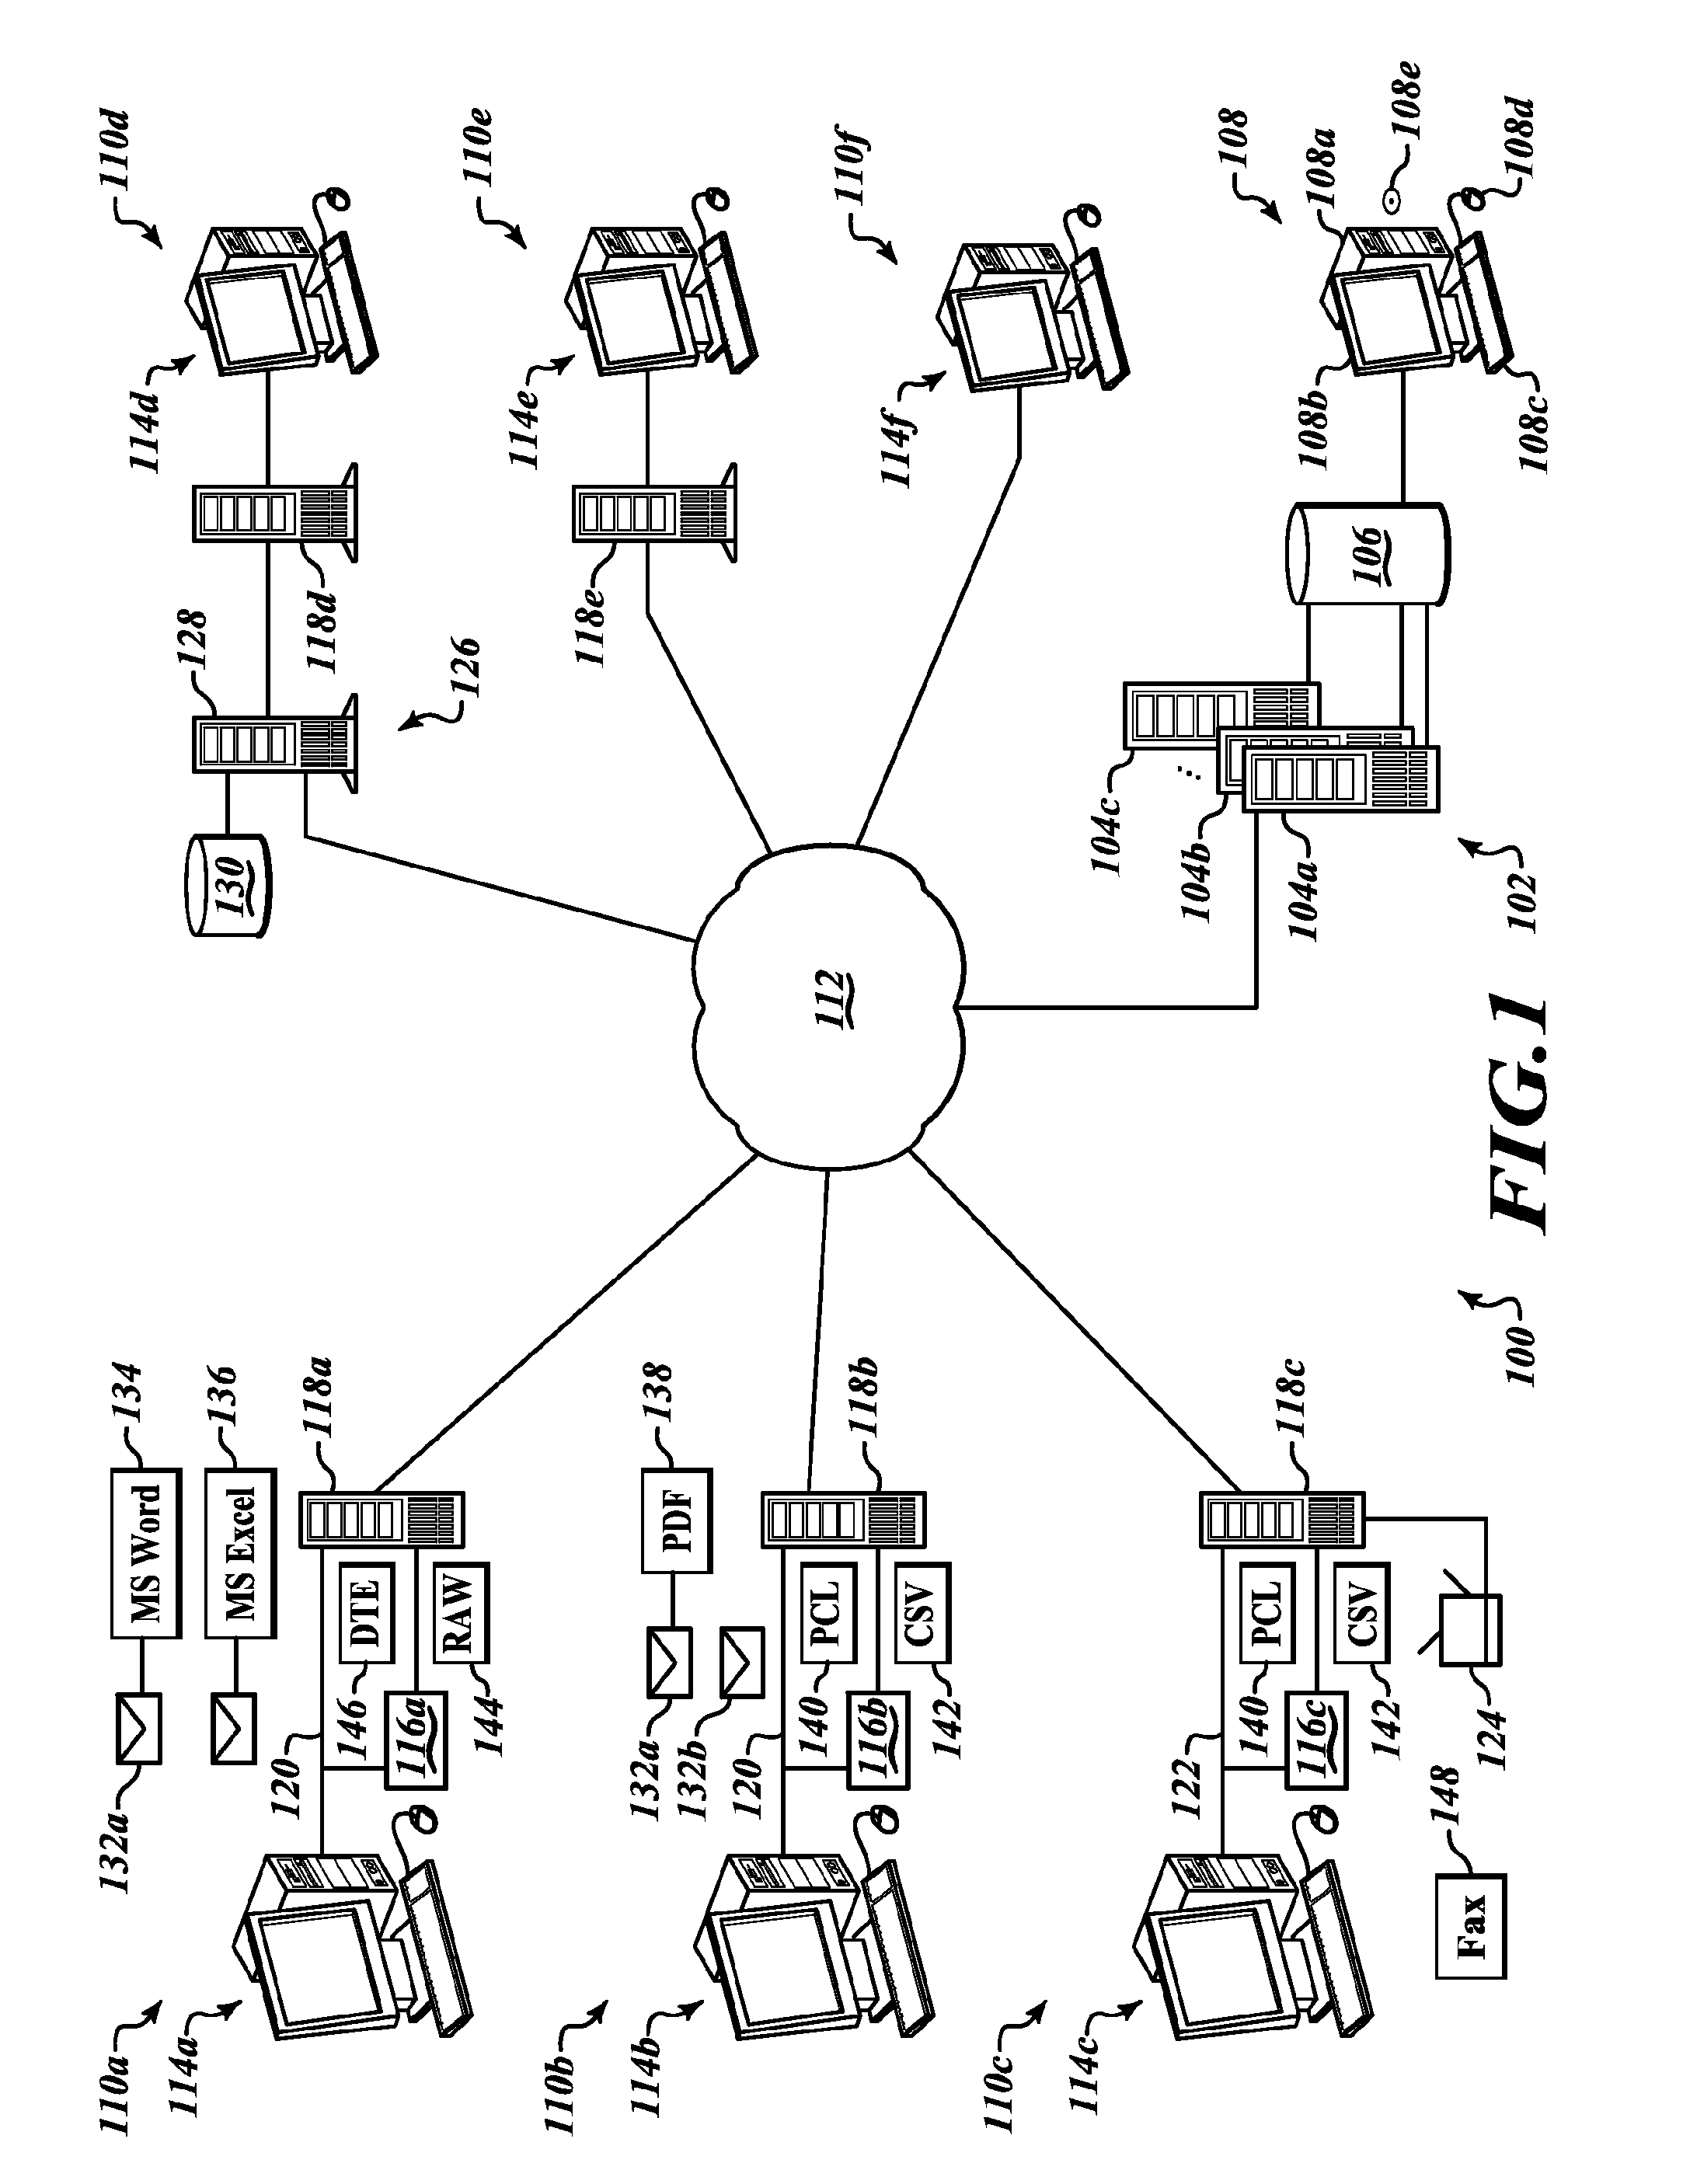 Systems, methods and articles to automatically transform documents transmitted between senders and recipients